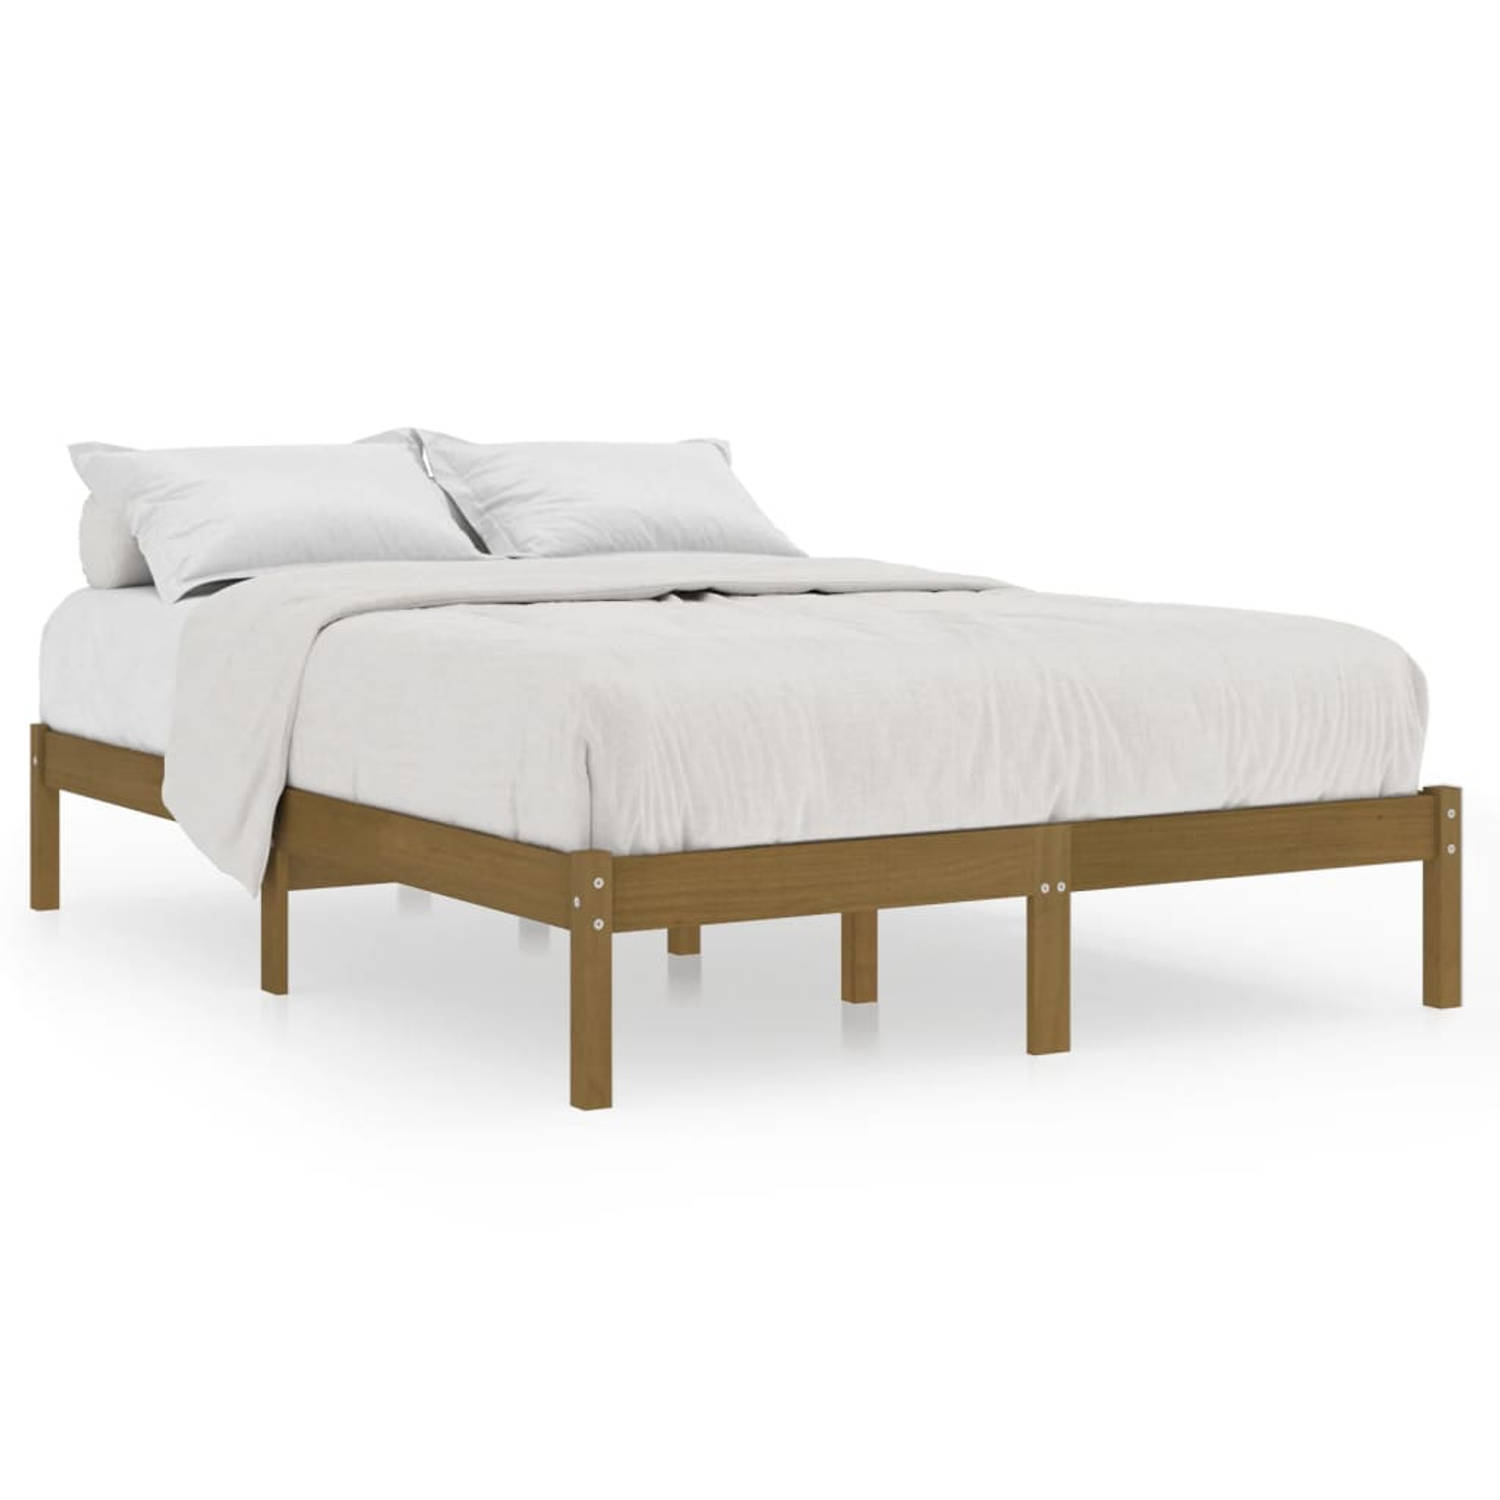 The Living Store Bedframe massief grenenhout honingbruin 140x190 cm - Bed